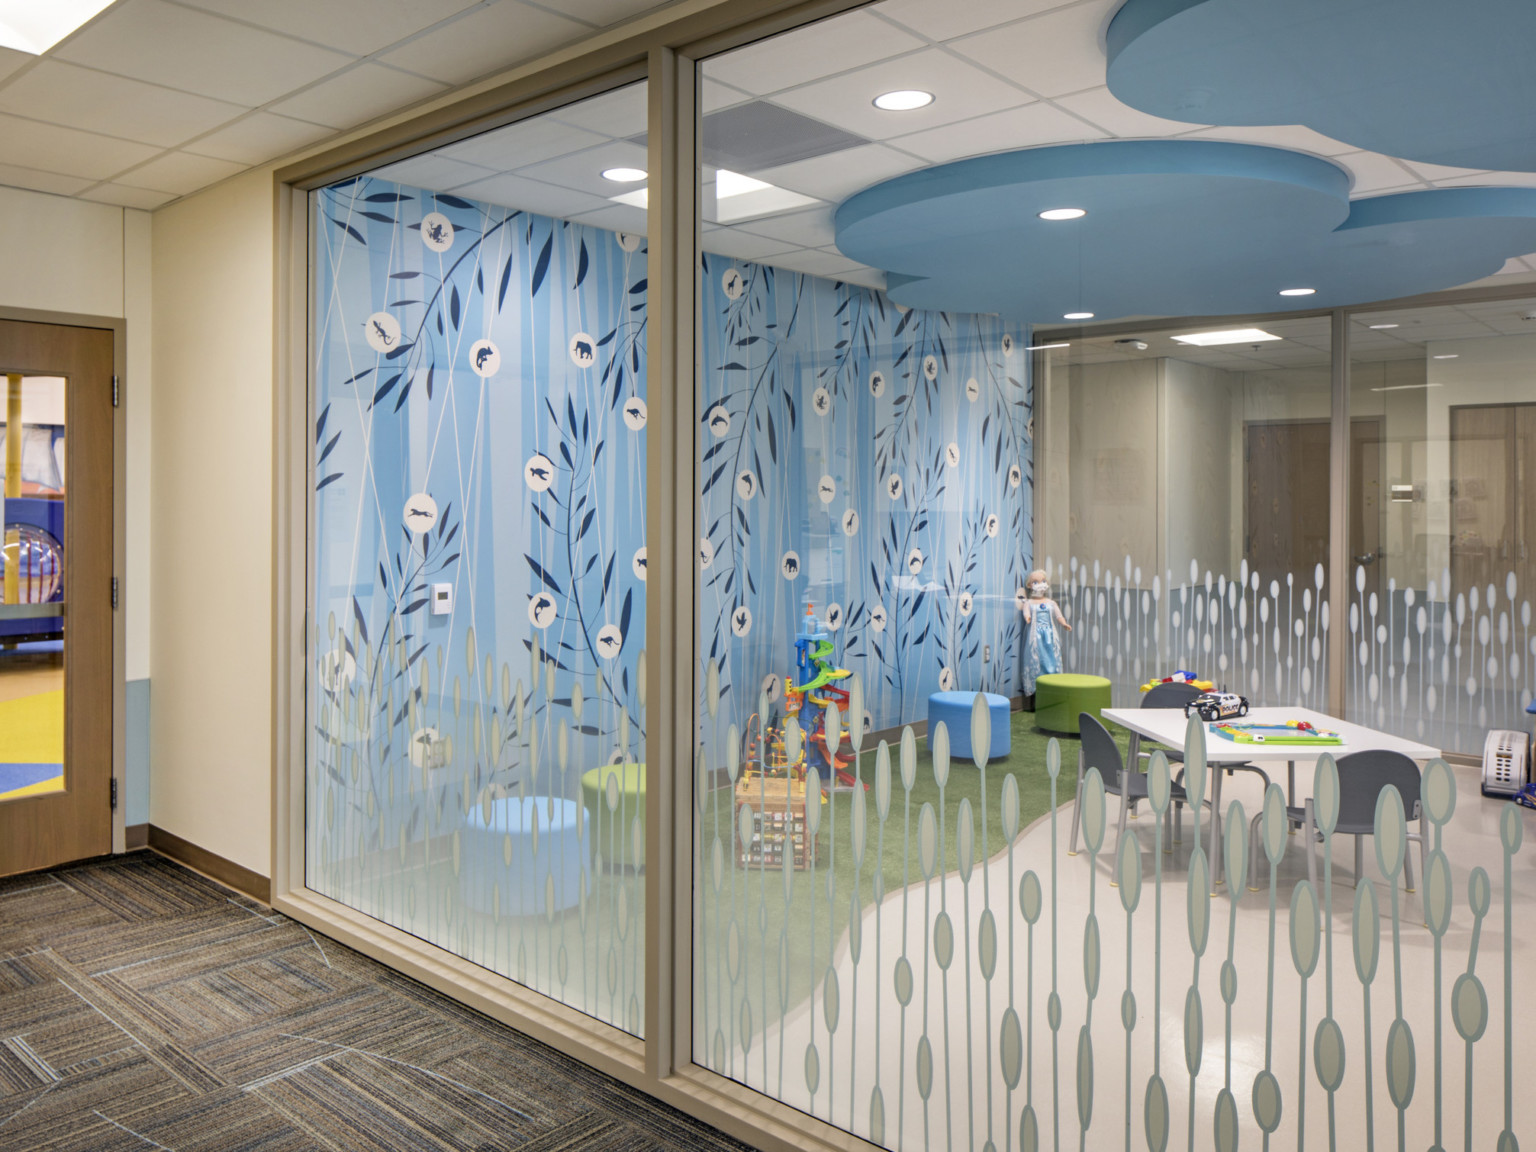 Hall looks into glass walled playroom blue abstract floral mural on back wall, and blue cloud shaped drop ceiling detail